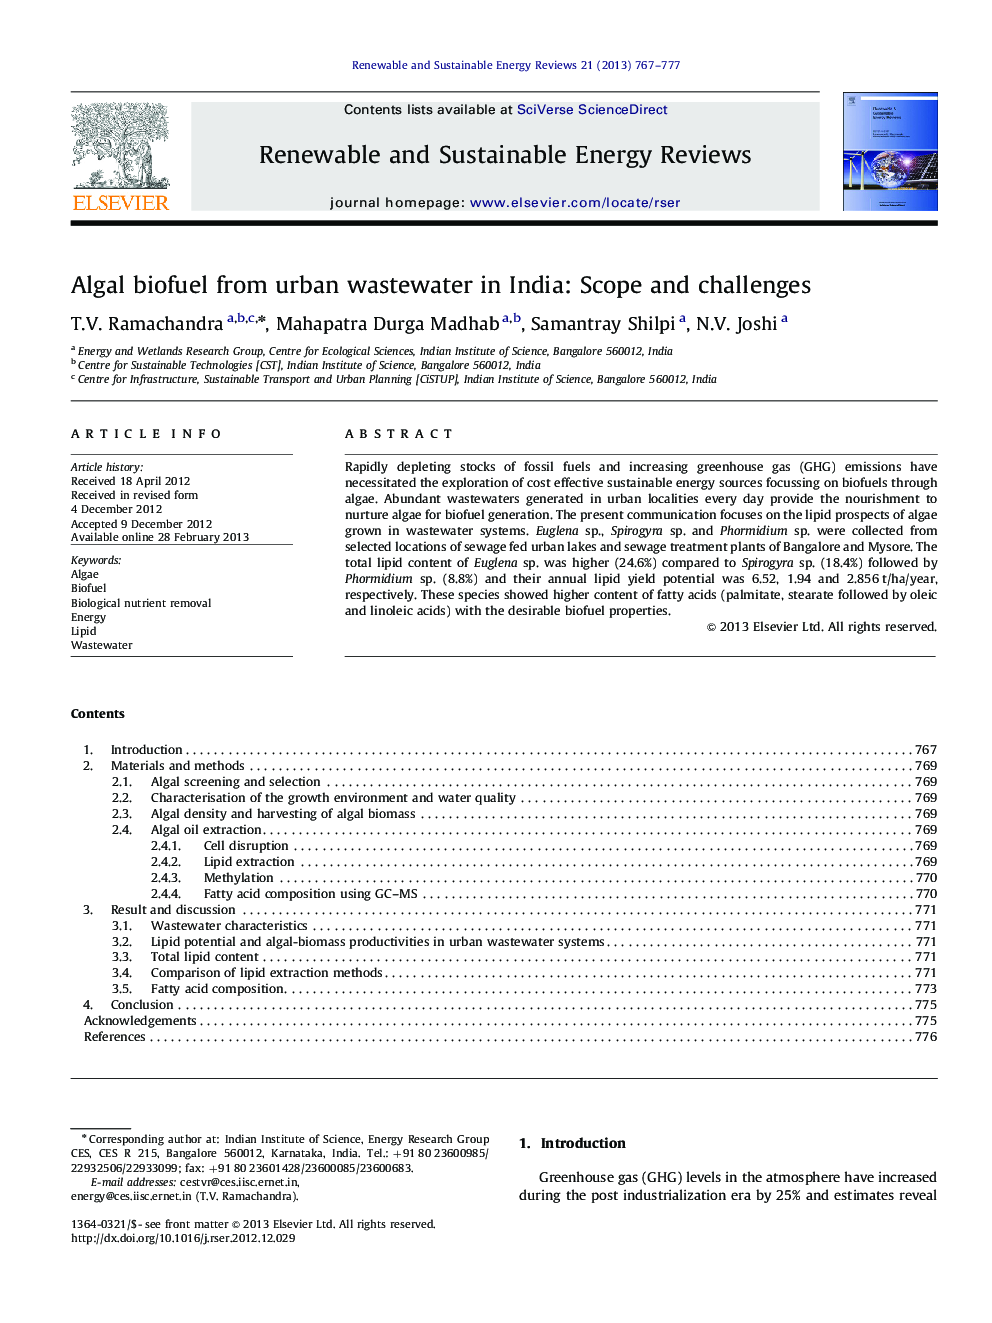 Algal biofuel from urban wastewater in India: Scope and challenges